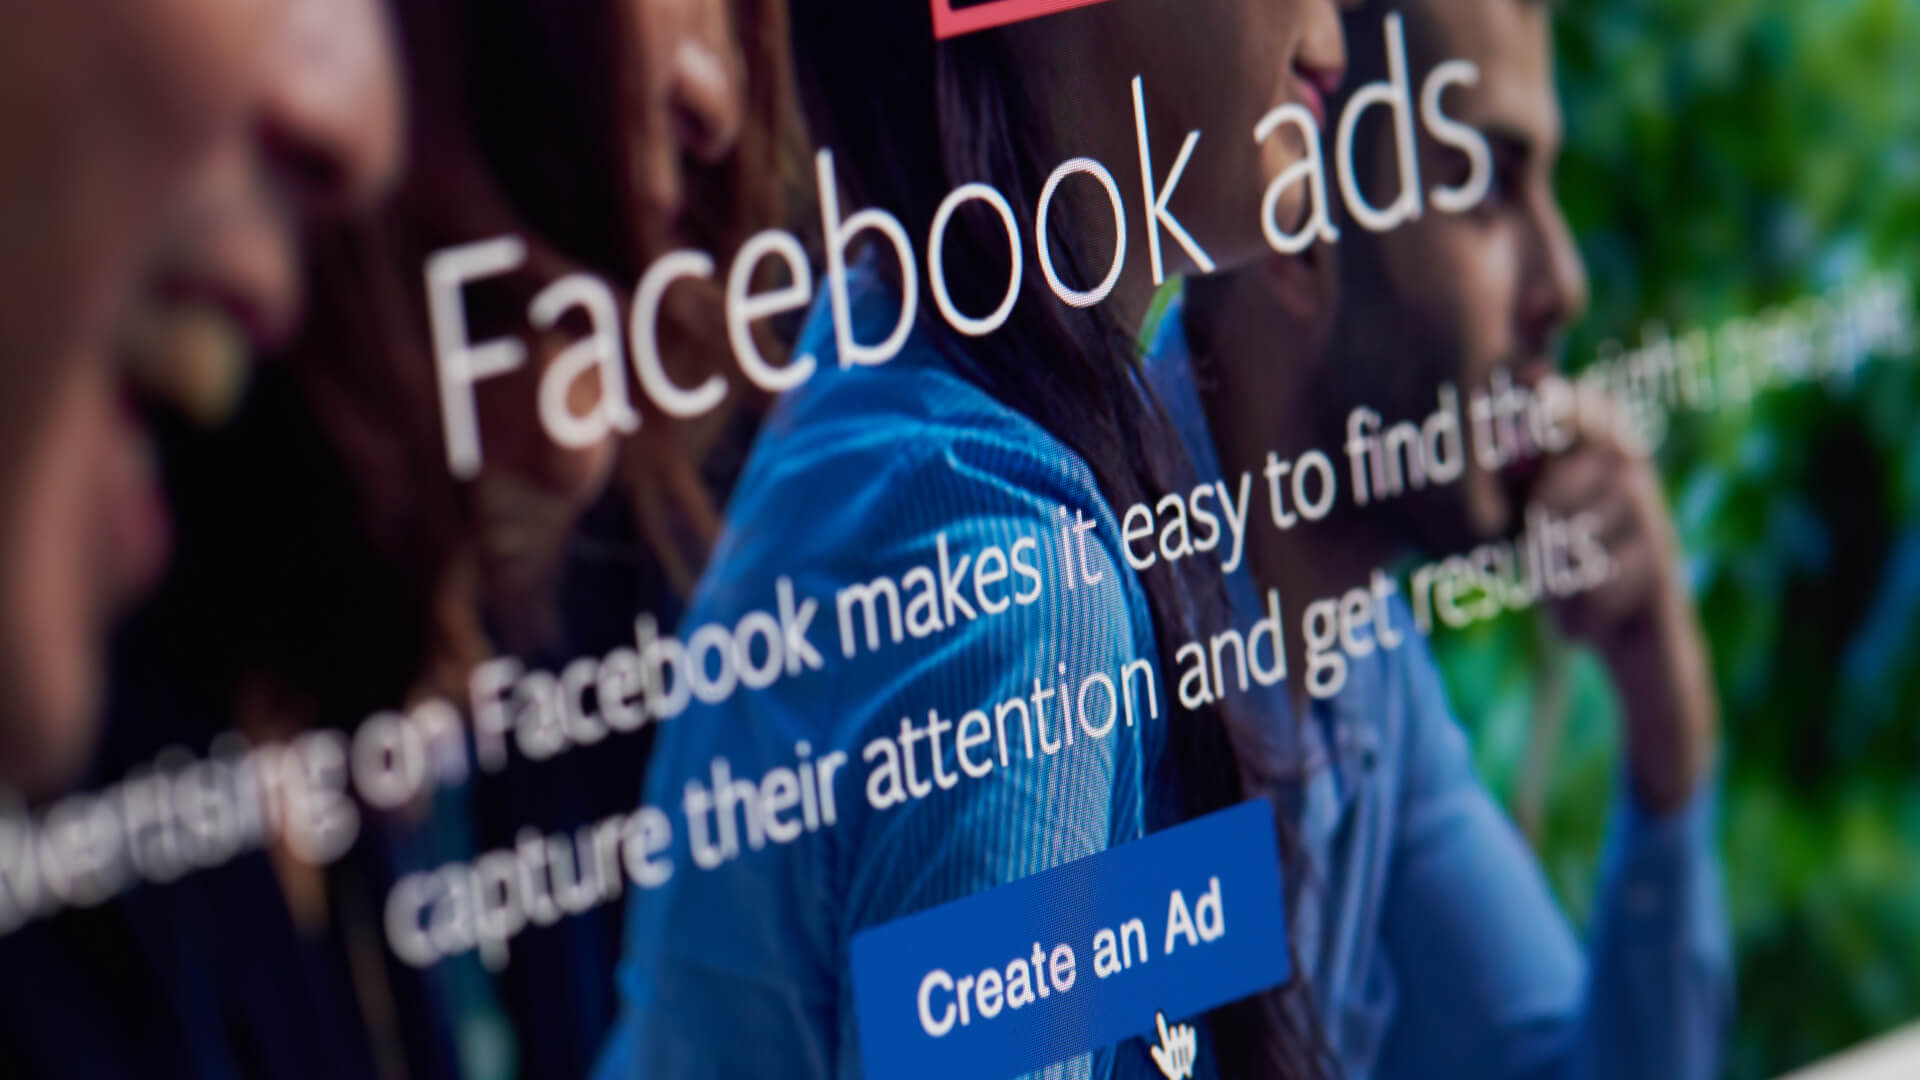 Facebook Ads announces new performance, reporting and measurement products in light of iOS privacy changes